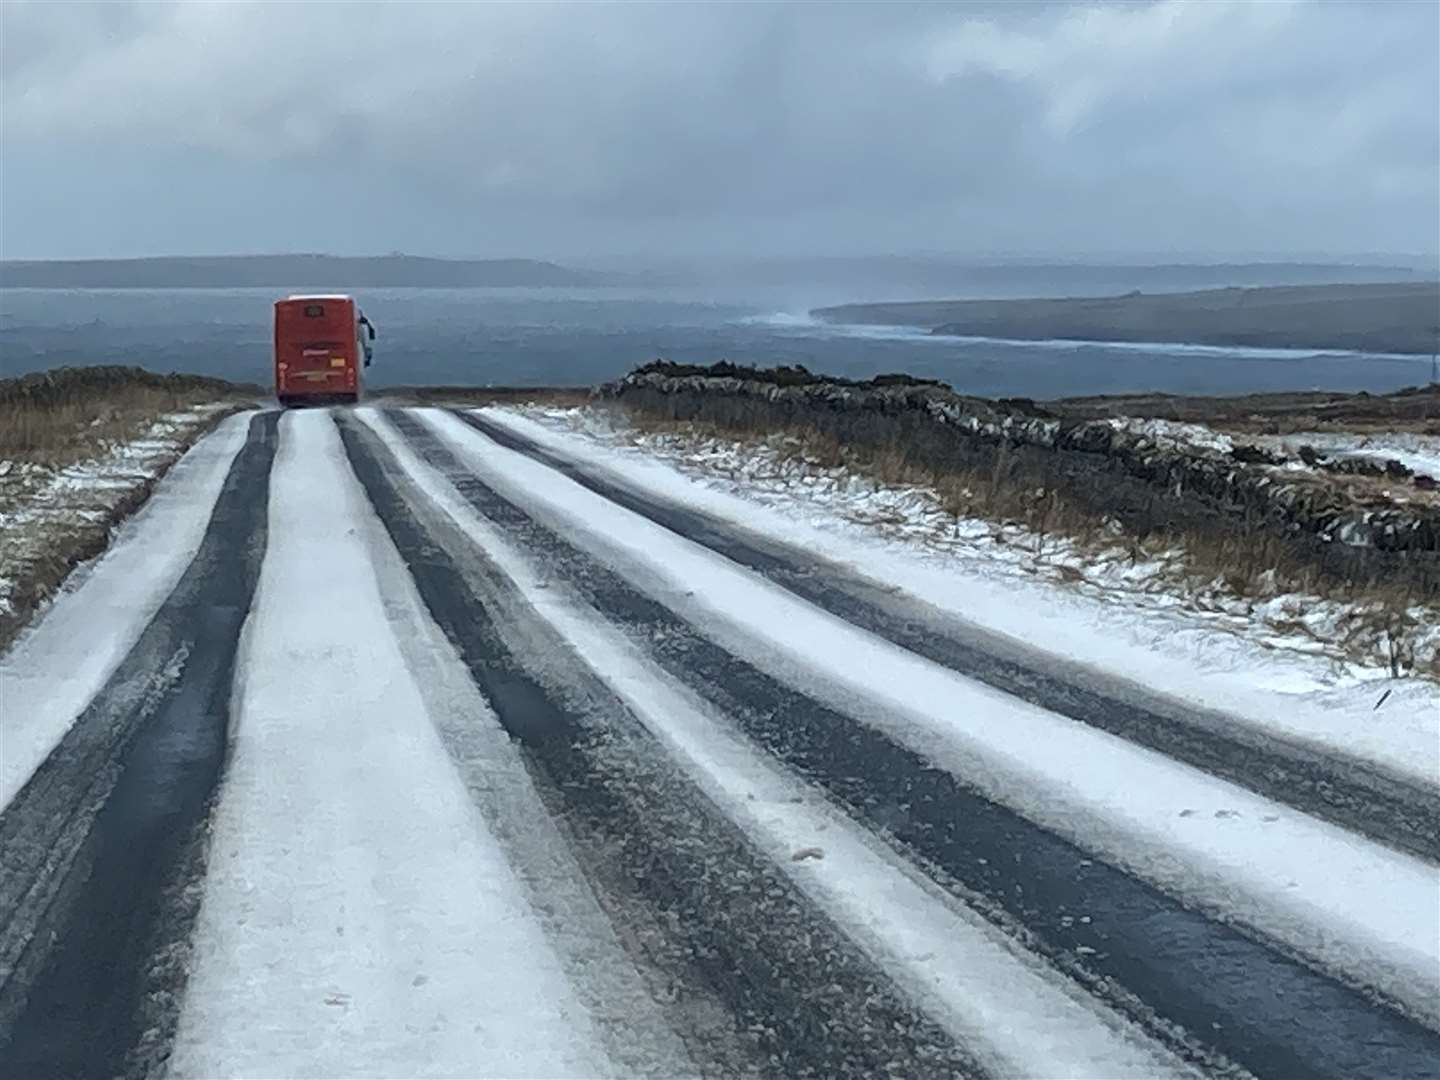 Councillor Matthew Reiss sent this photo to TSB on Friday to back up his call for a rethink on the Thurso branch closure. 'Here is a picture of the bus from the remoter rural areas approaching Thurso on the main A836 public road today,' he told the bank's senior communications manager for Scotland. 'This is why people do not attend your branch on a weekly basis.'